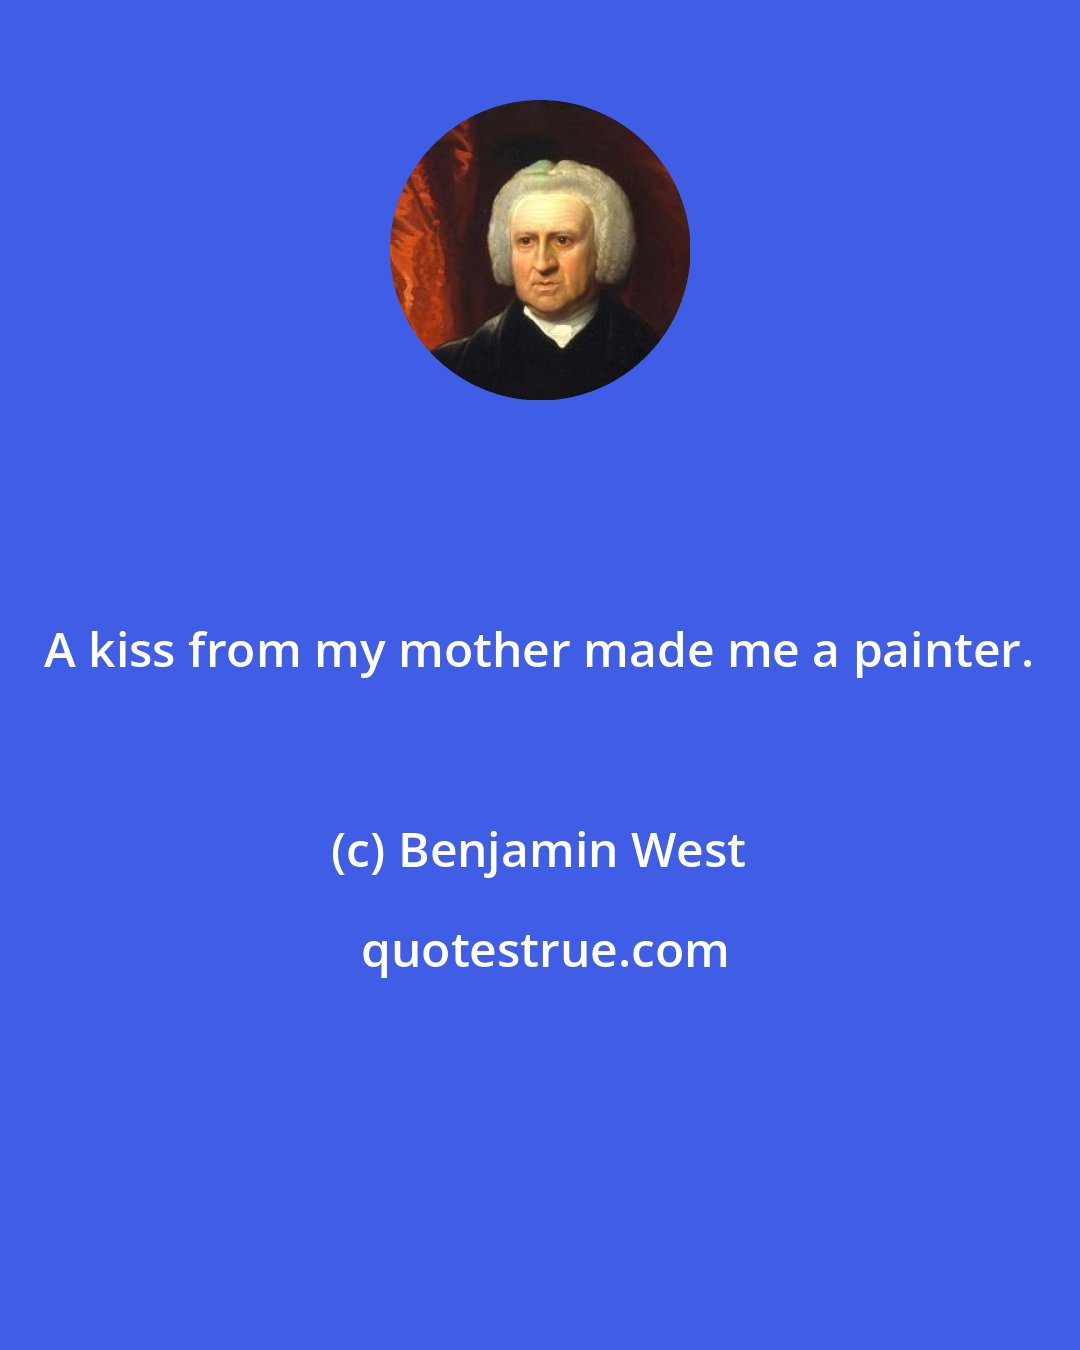 Benjamin West: A kiss from my mother made me a painter.